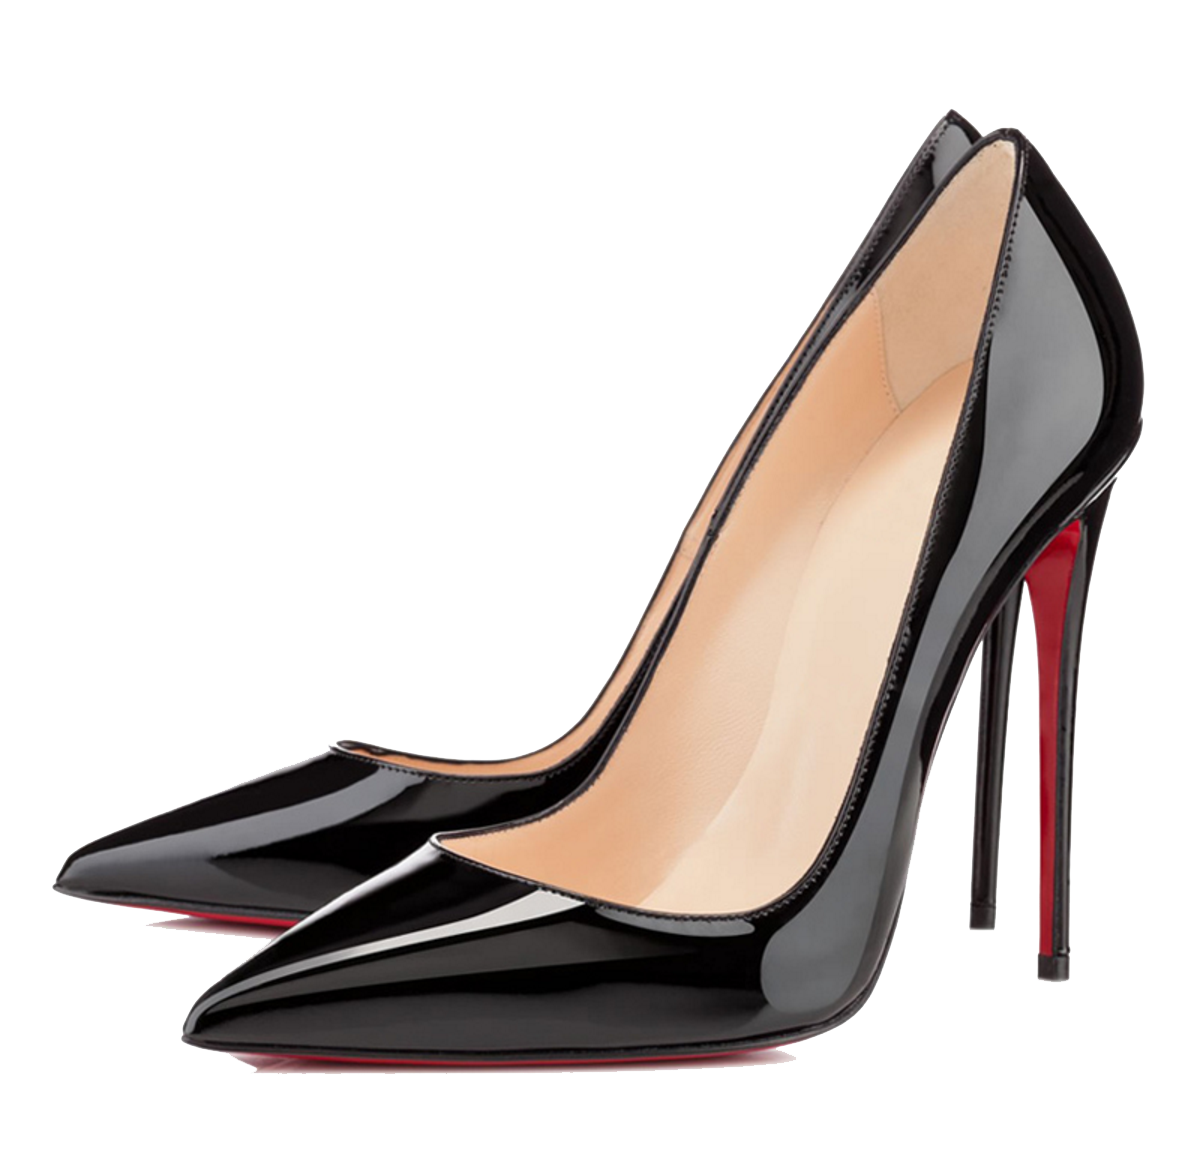 Women Shoes Free Png Image PNG Image